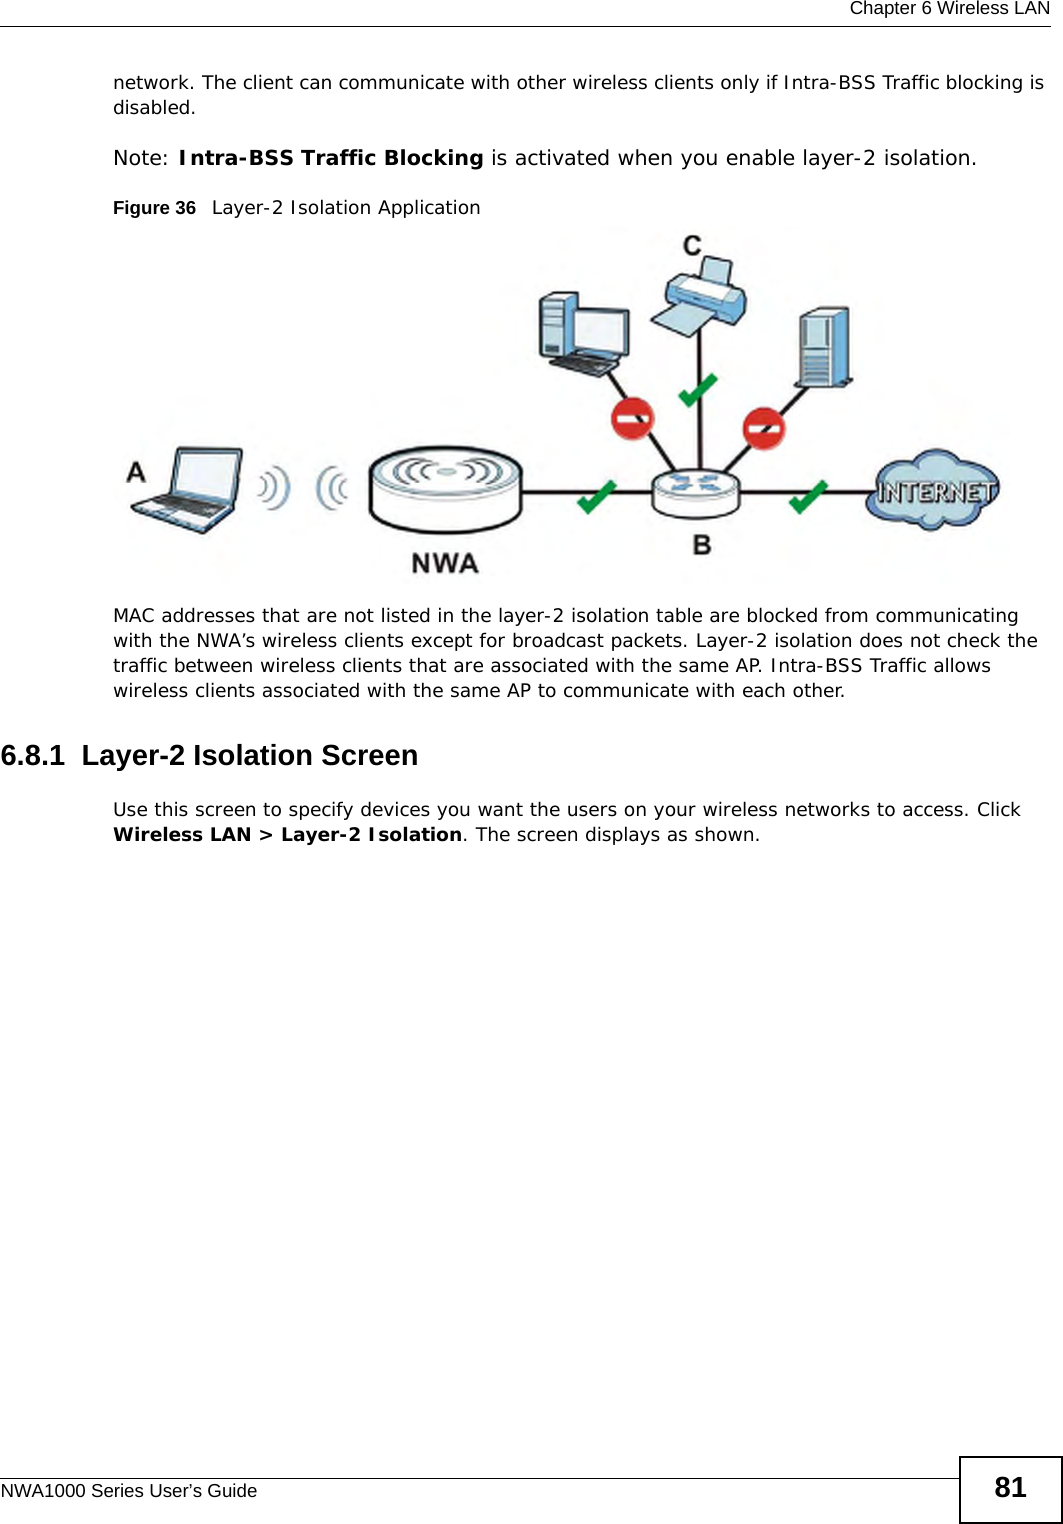  Chapter 6 Wireless LANNWA1000 Series User’s Guide 81network. The client can communicate with other wireless clients only if Intra-BSS Traffic blocking is disabled.Note: Intra-BSS Traffic Blocking is activated when you enable layer-2 isolation.Figure 36   Layer-2 Isolation ApplicationMAC addresses that are not listed in the layer-2 isolation table are blocked from communicating with the NWA’s wireless clients except for broadcast packets. Layer-2 isolation does not check the traffic between wireless clients that are associated with the same AP. Intra-BSS Traffic allows wireless clients associated with the same AP to communicate with each other.6.8.1  Layer-2 Isolation ScreenUse this screen to specify devices you want the users on your wireless networks to access. Click Wireless LAN &gt; Layer-2 Isolation. The screen displays as shown.